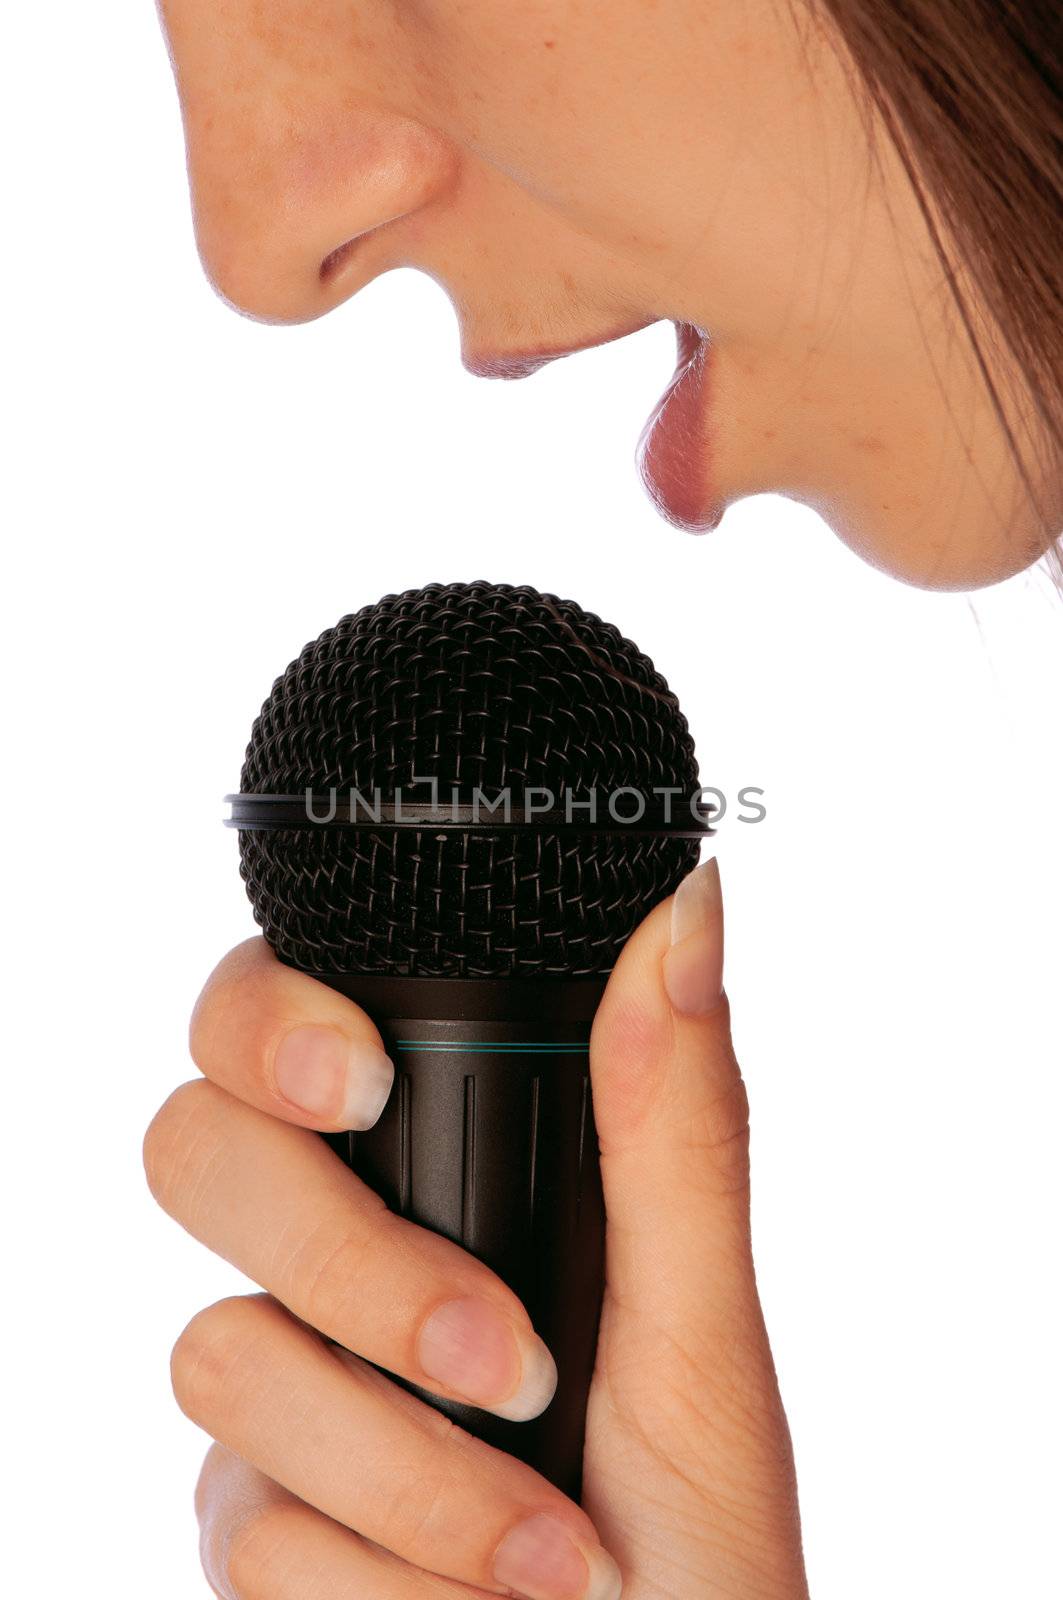 The singer sings a song in a microphone